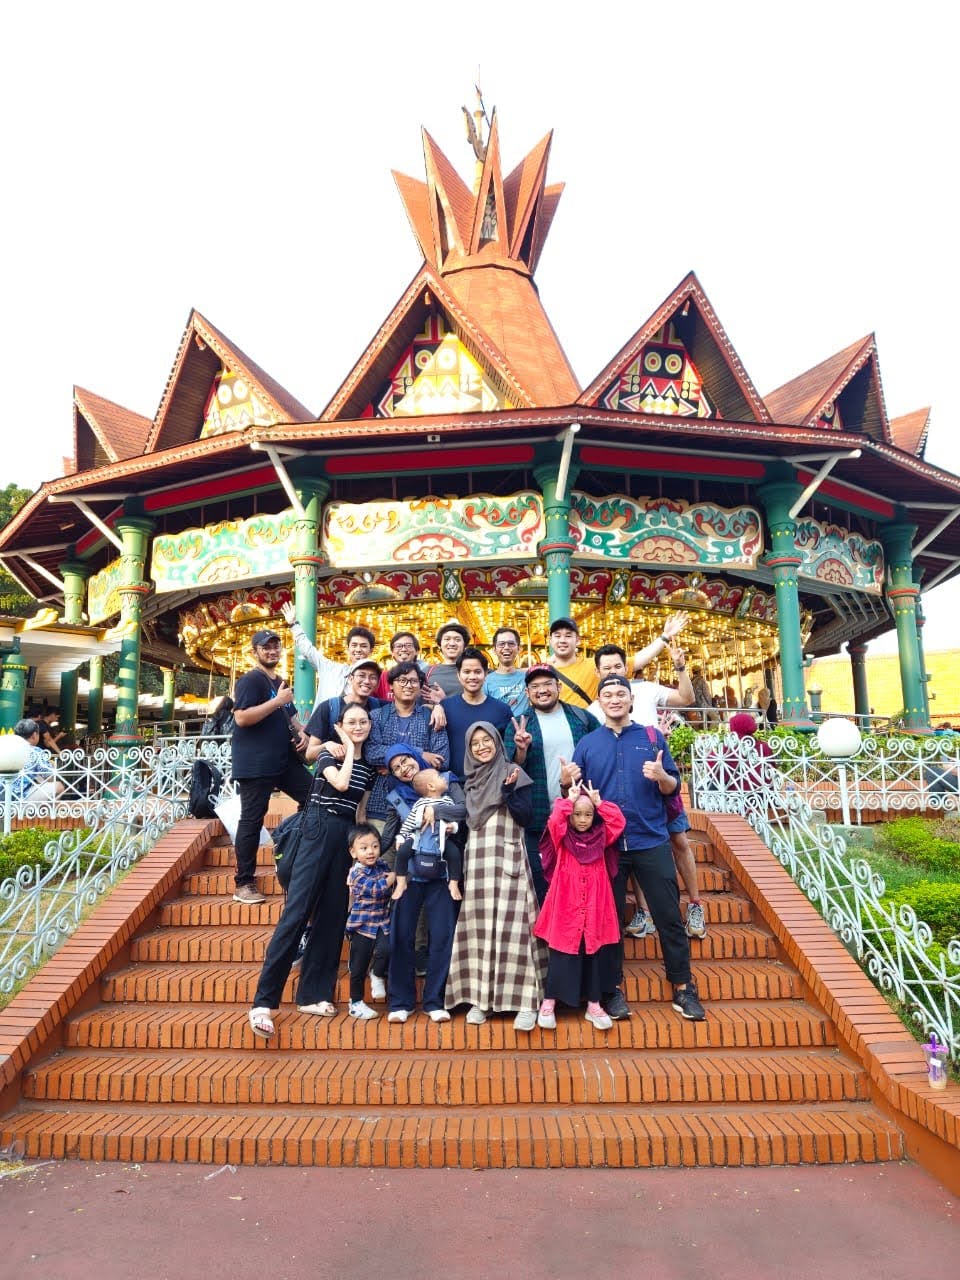 Bison goes to dufan